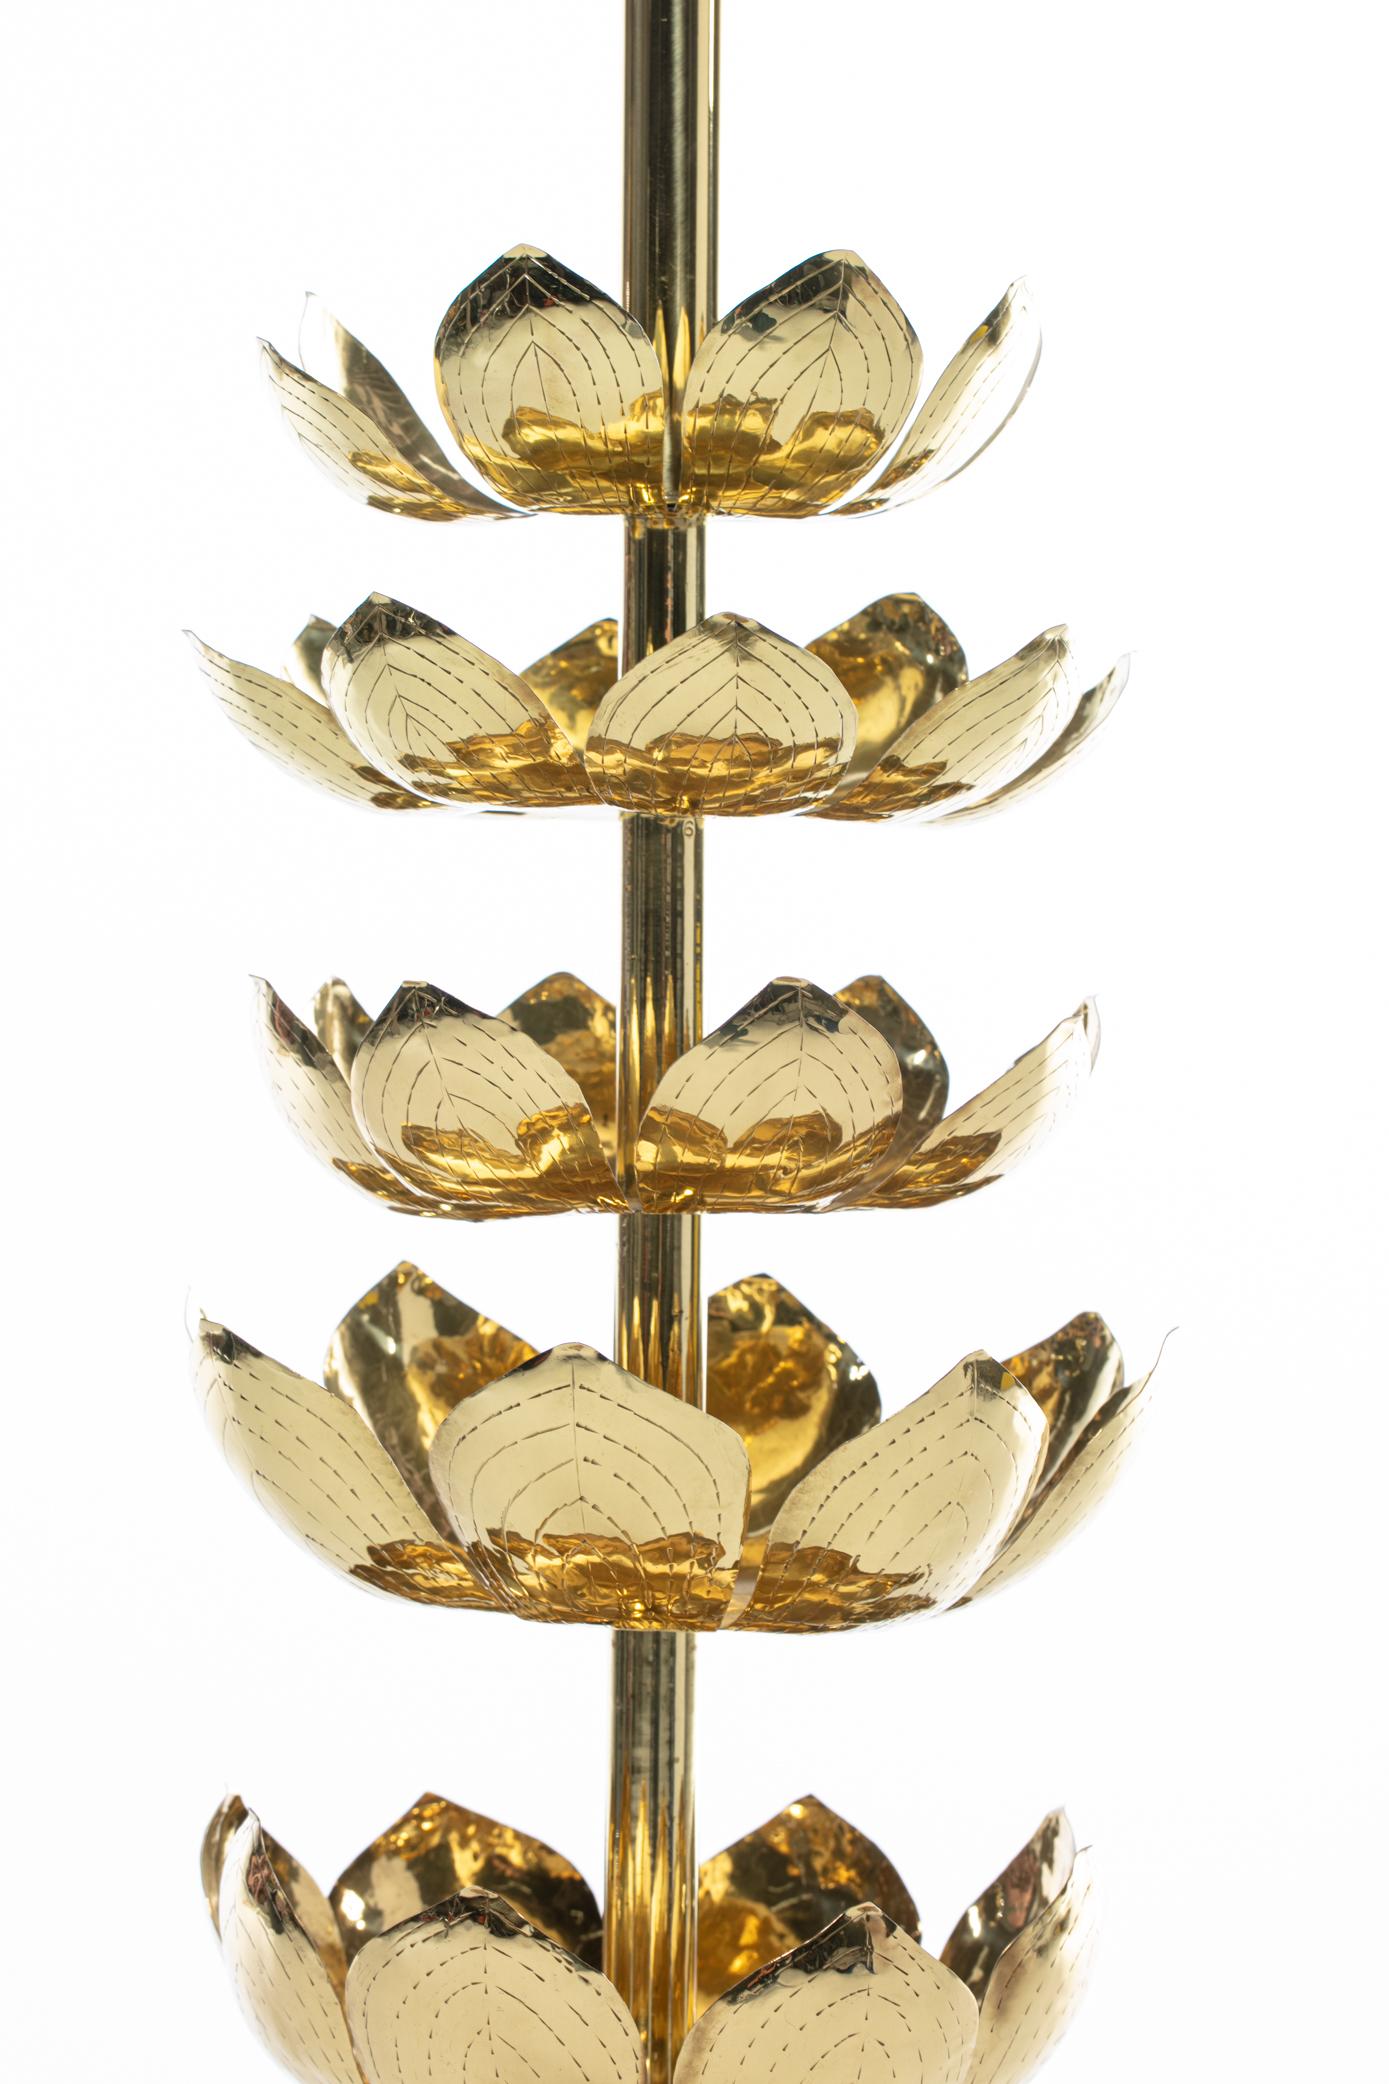 Tall Brass Feldman Lighting Lamp with Lotus Flower Layered Detail c. 1955 In Good Condition For Sale In Saint Louis, MO